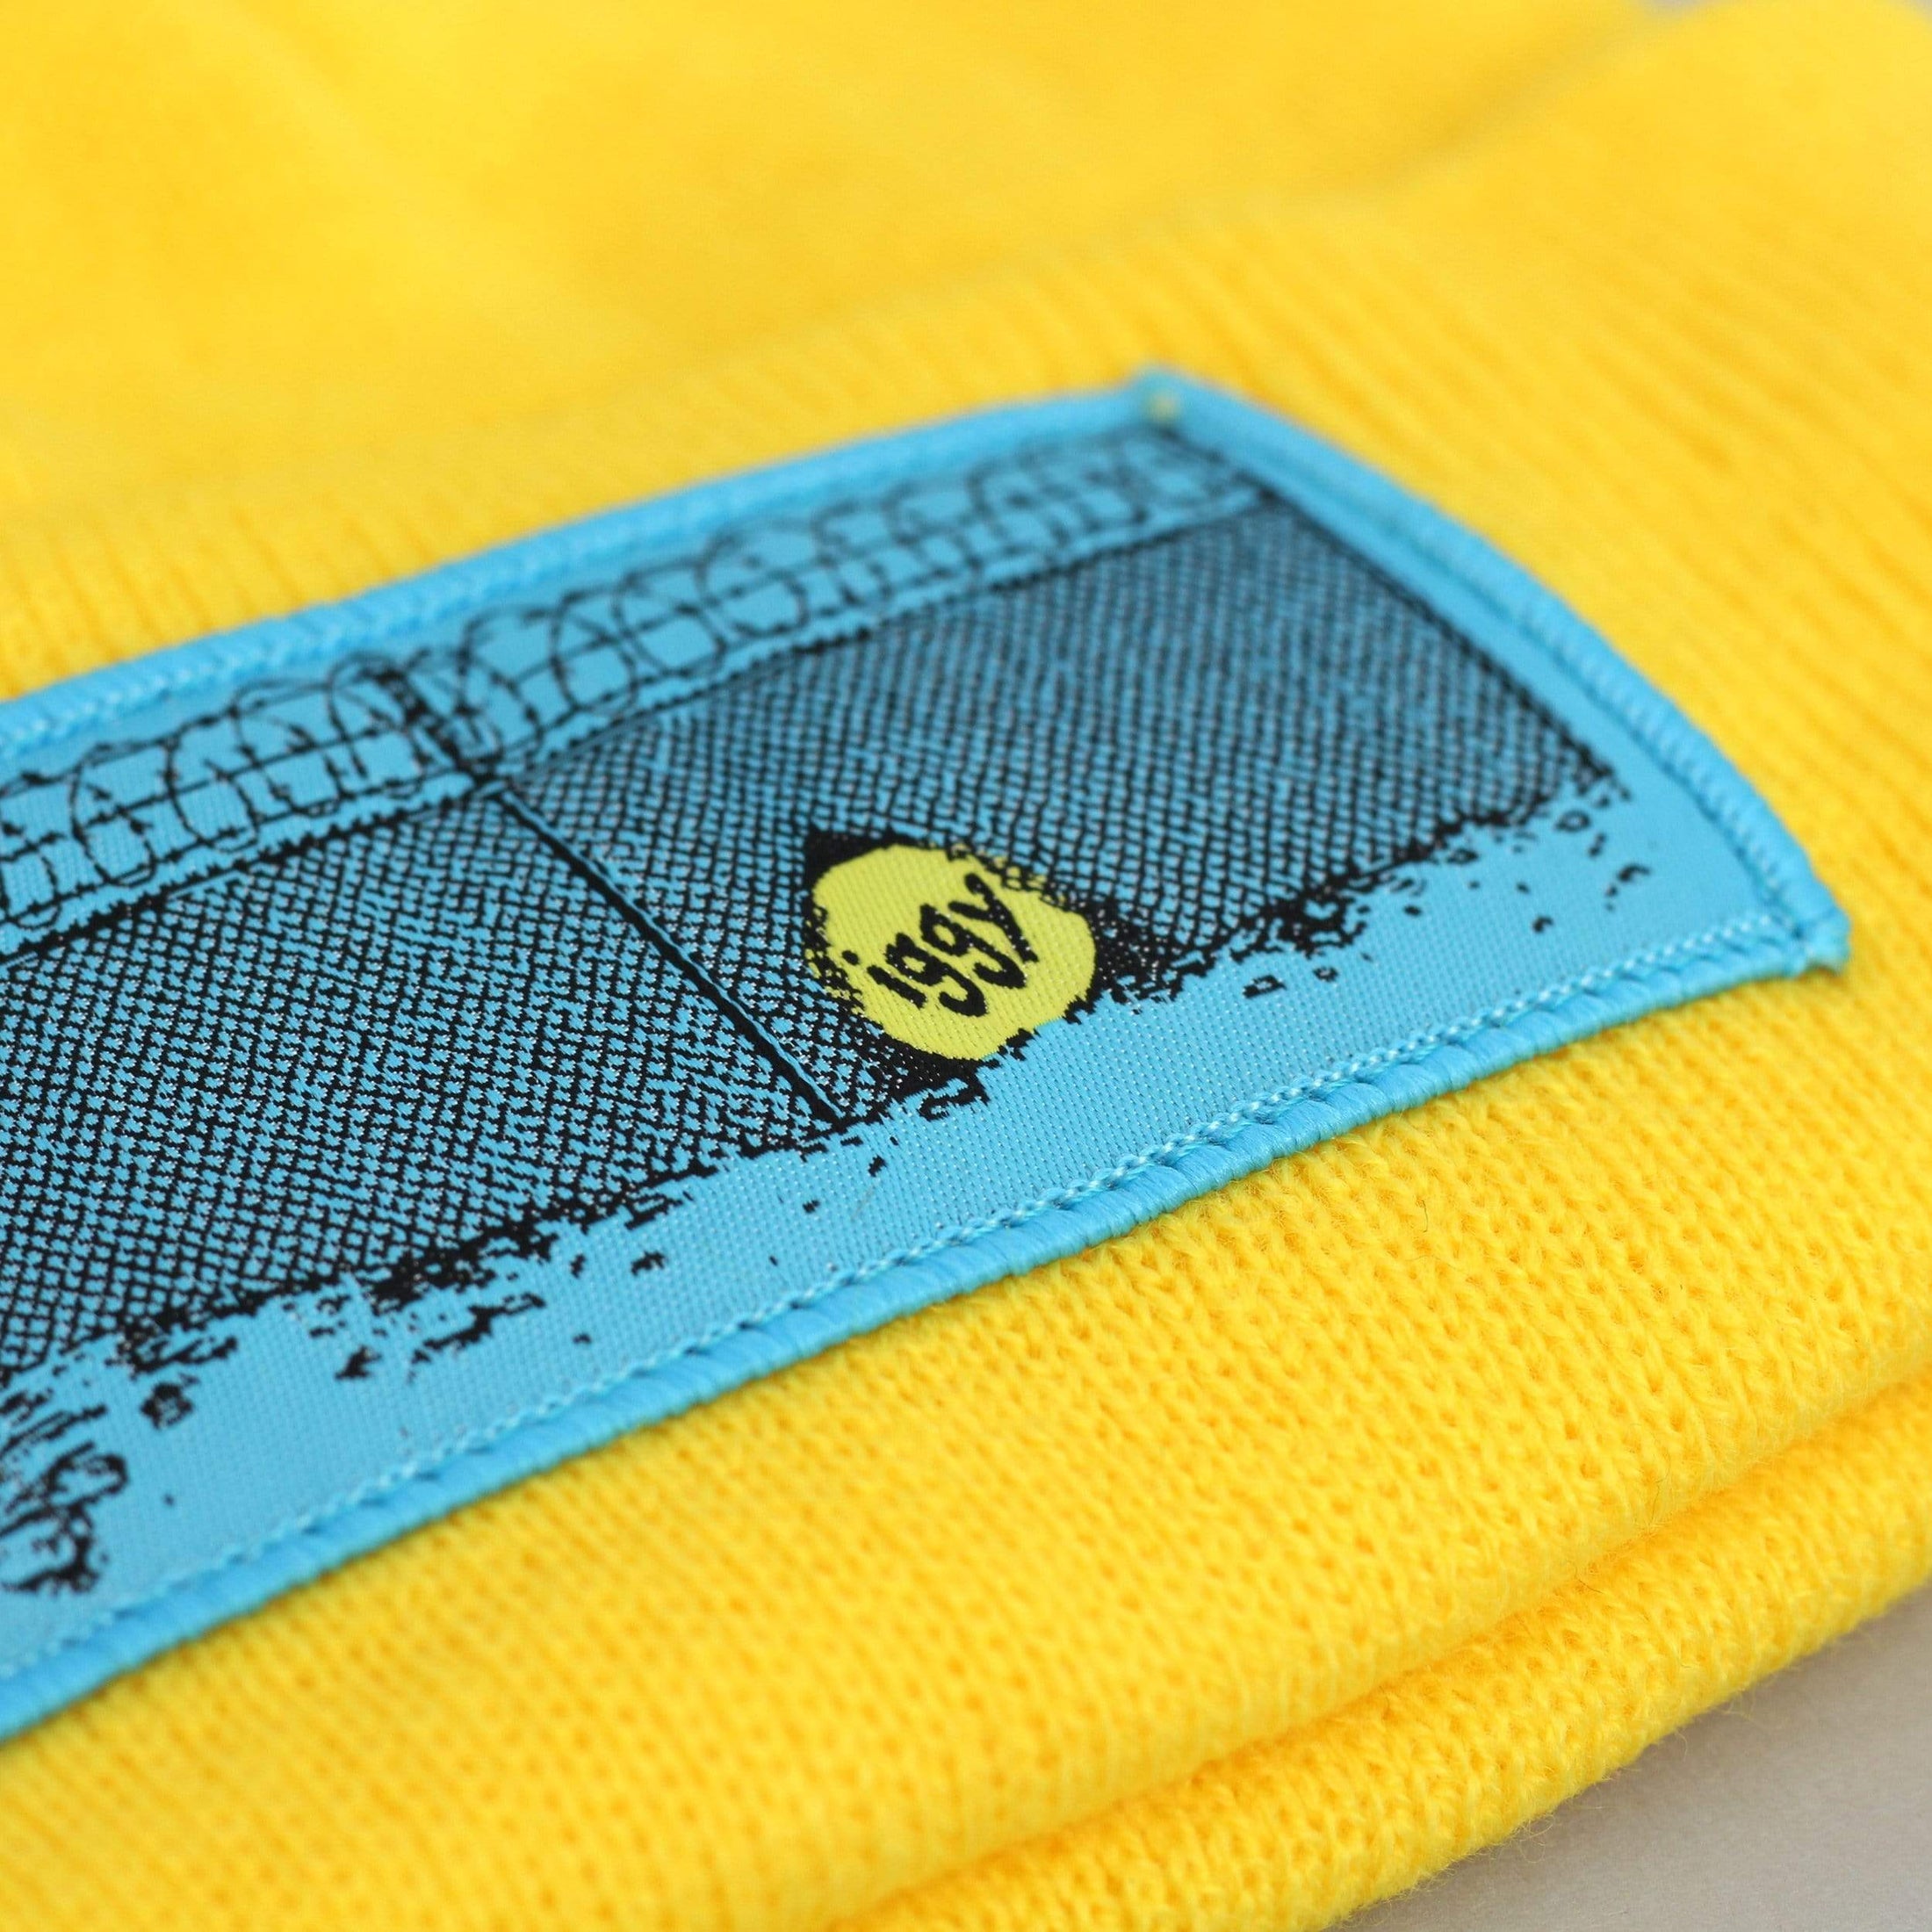 Iggy Escape Patch Beanie Yellow